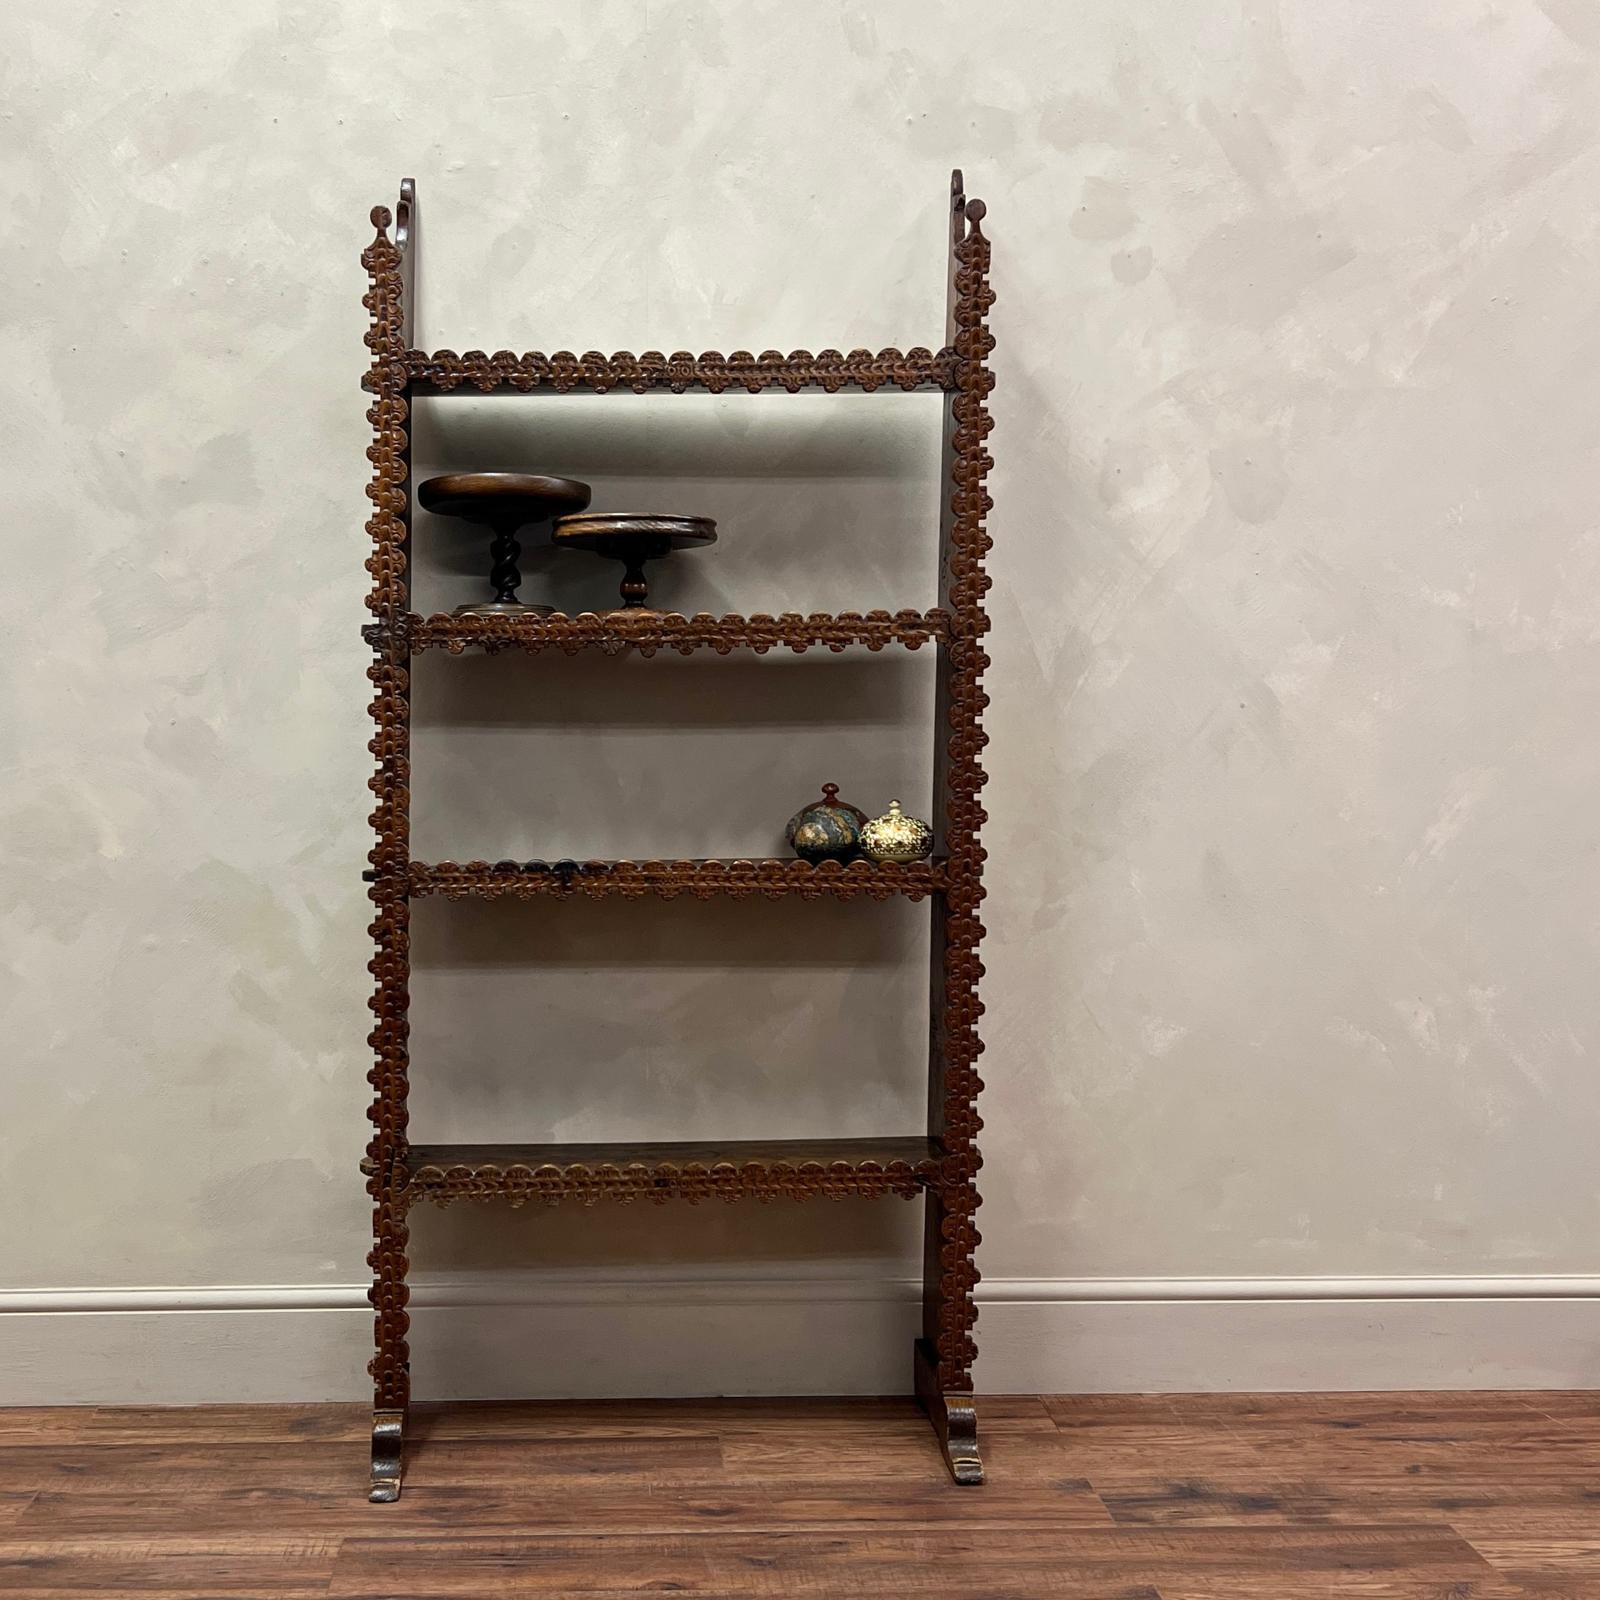 Rare 19th Century Hand Carved Etagere.
This style of carving is very typical of certain areas of the Pyranees.
Made from pitch pine with pegged sides and primitively carved fronts, this would make a talking point in any room.

France, circa